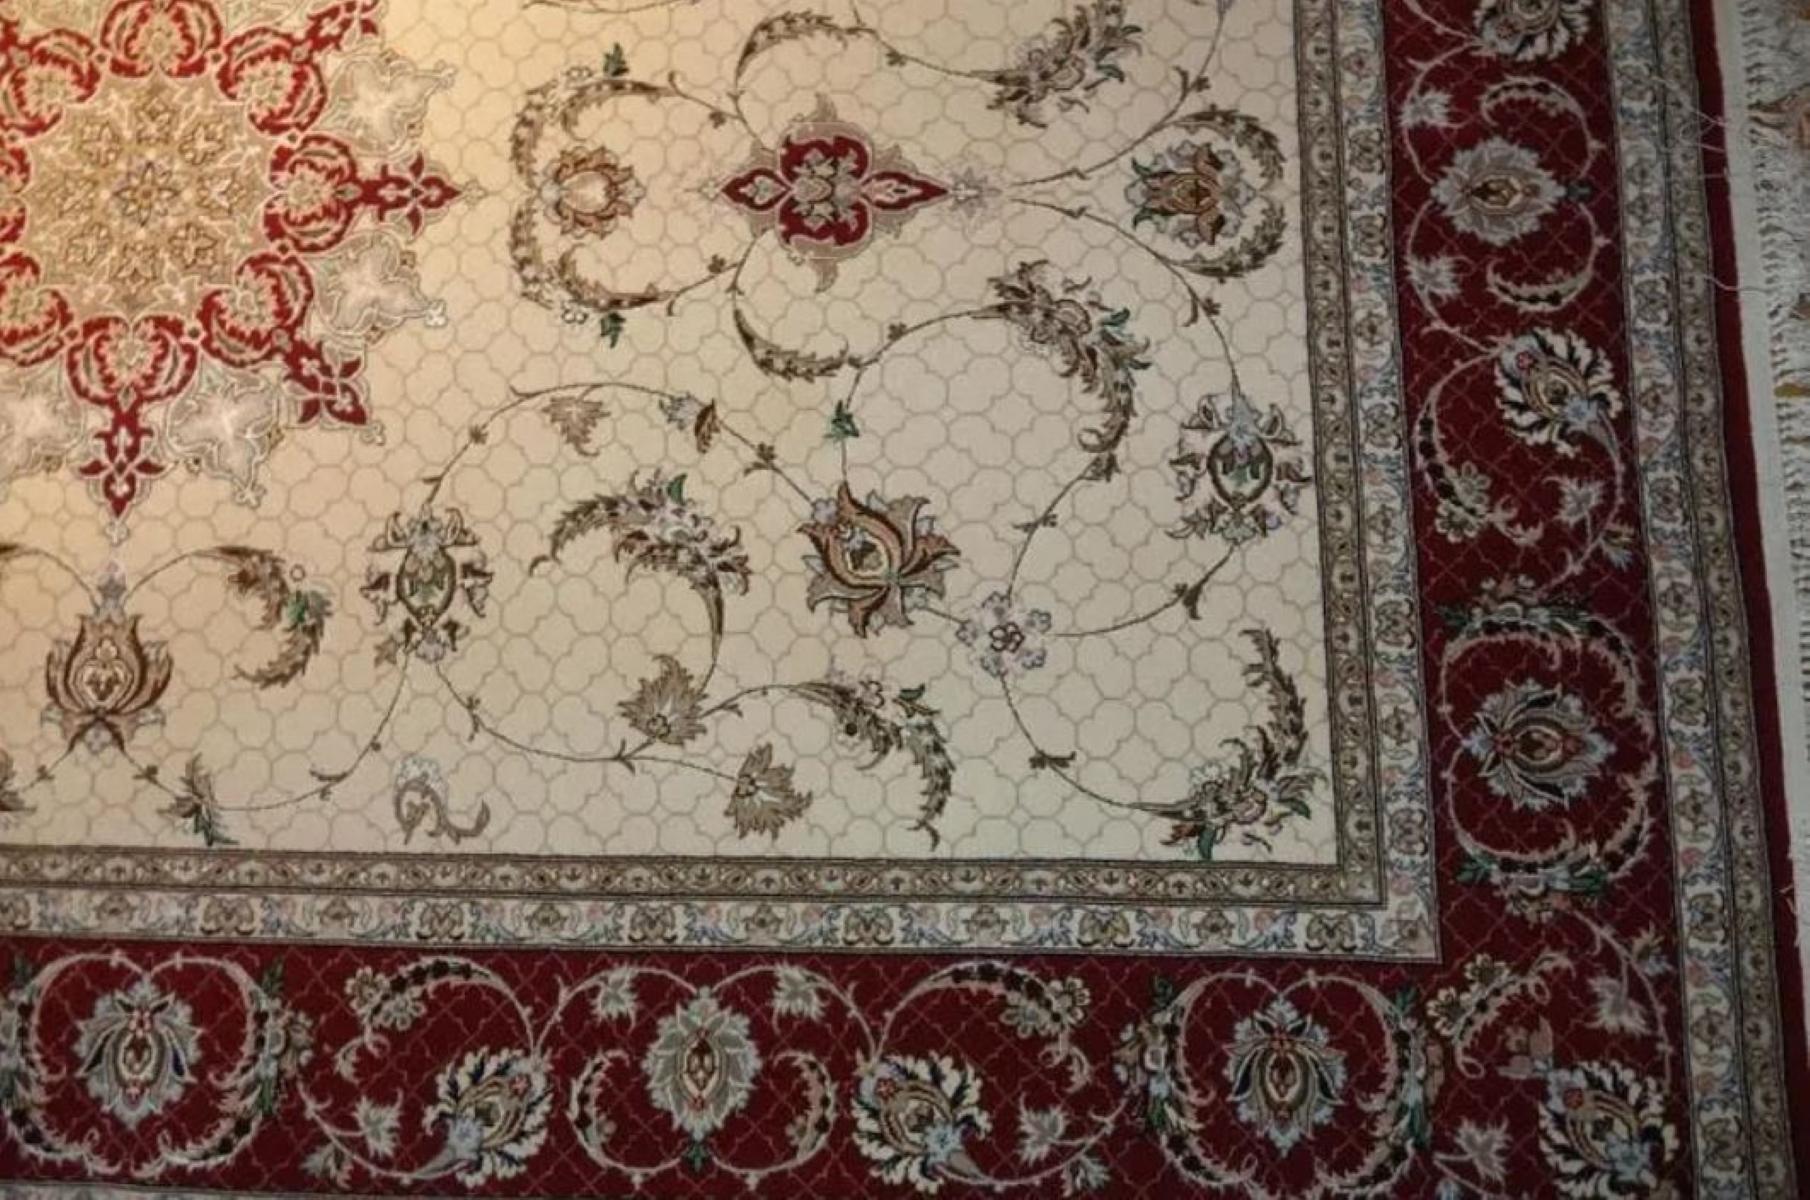 Very fine Persian Rug Isfahan  600 Knots per inch, Size 6.5 x 4.5 Iran Isfahan Davari Wool and Silk with a Silk Foundation. Around 2,000,000 knots tied by hand one-by-one. It takes year and a half to complete this piece of art.